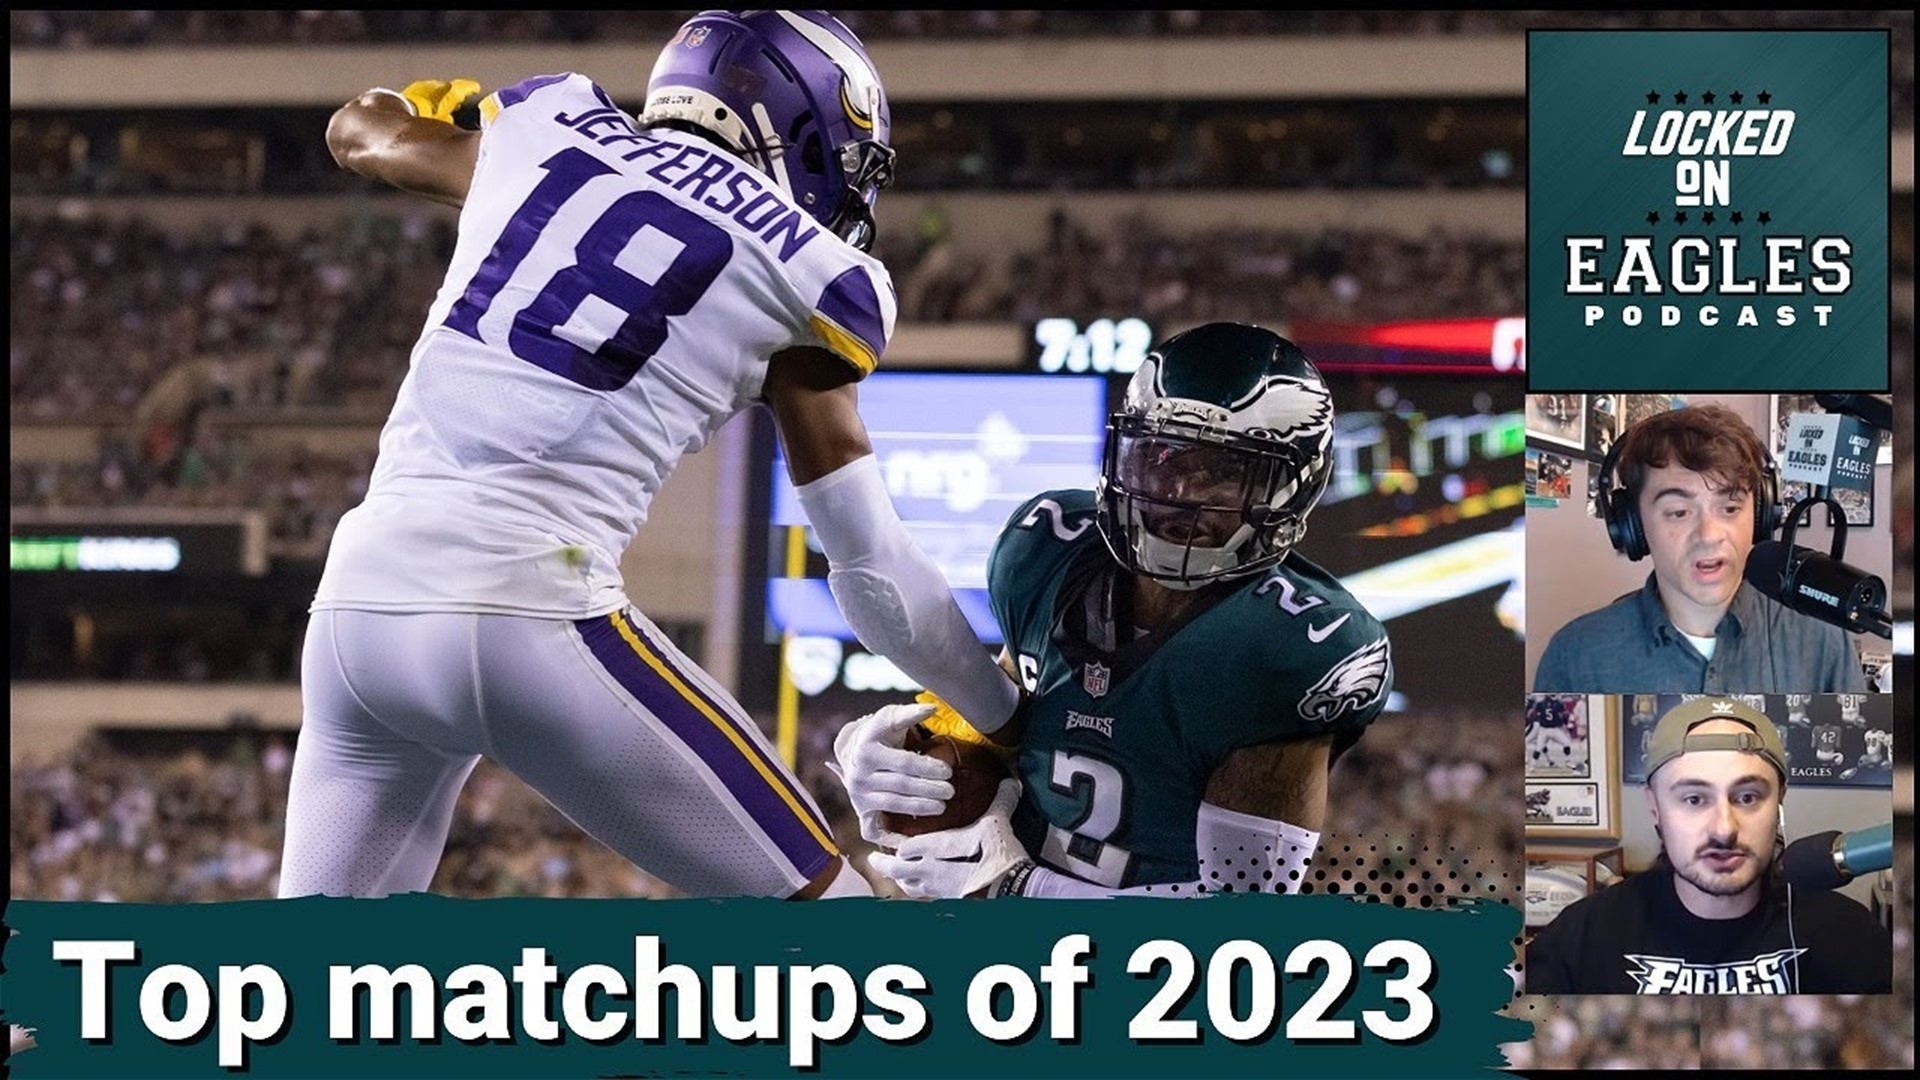 The Philadelphia Eagles 2023 schedule is out and there are plenty of star vs star matchups to watch out for including Darius Slay vs Justin Jefferson Round 2!